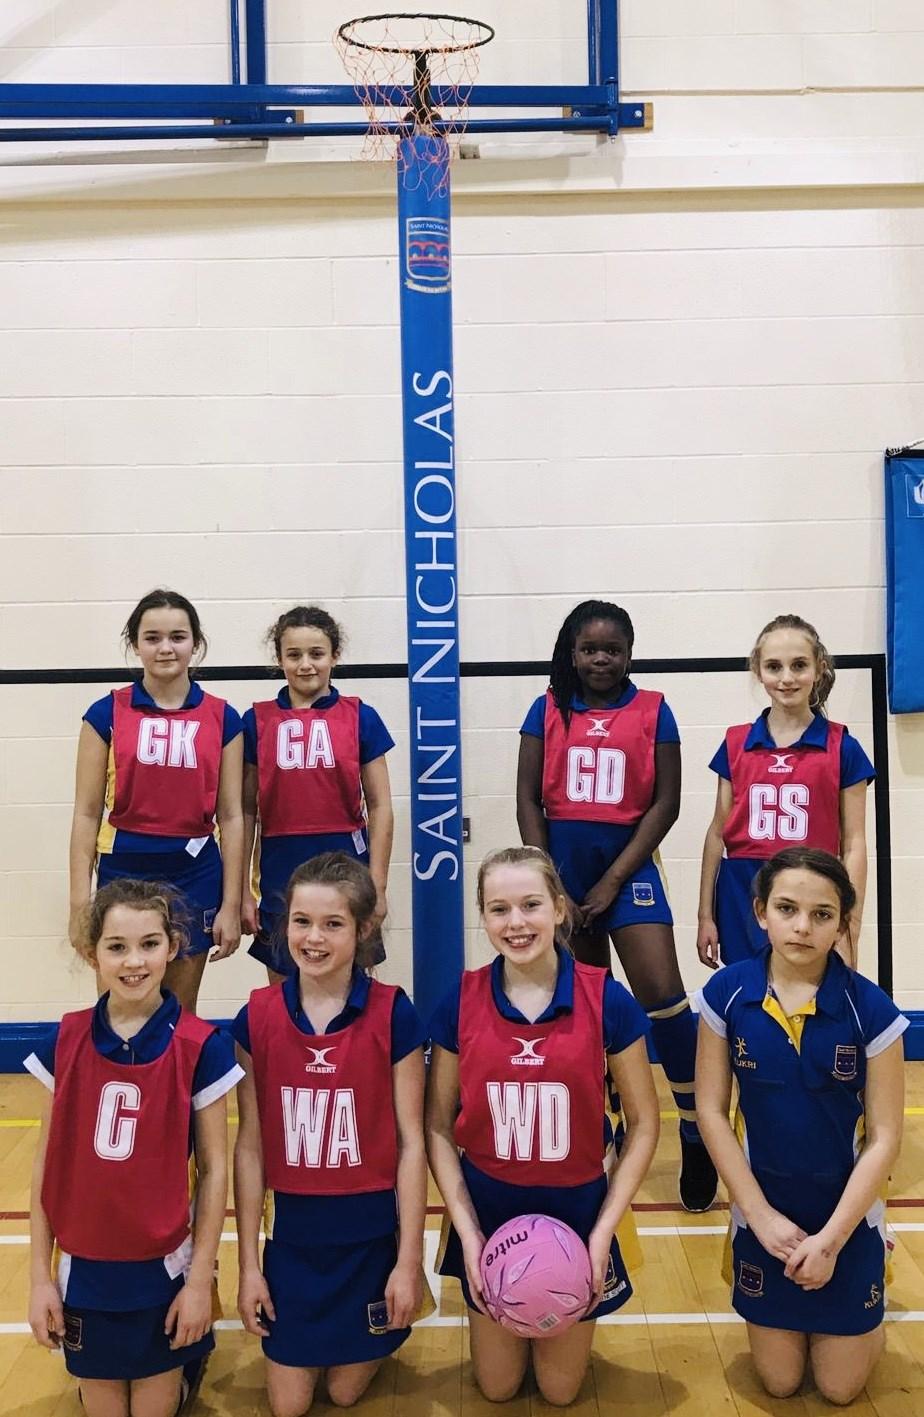 NETBALL Report by Tiffany, Year 6 On Wednesday, Oba, Xanthe, Katherine, Anabelle, Lucy, Tallulah and Rhian took part in a netball match against Gosfield School.